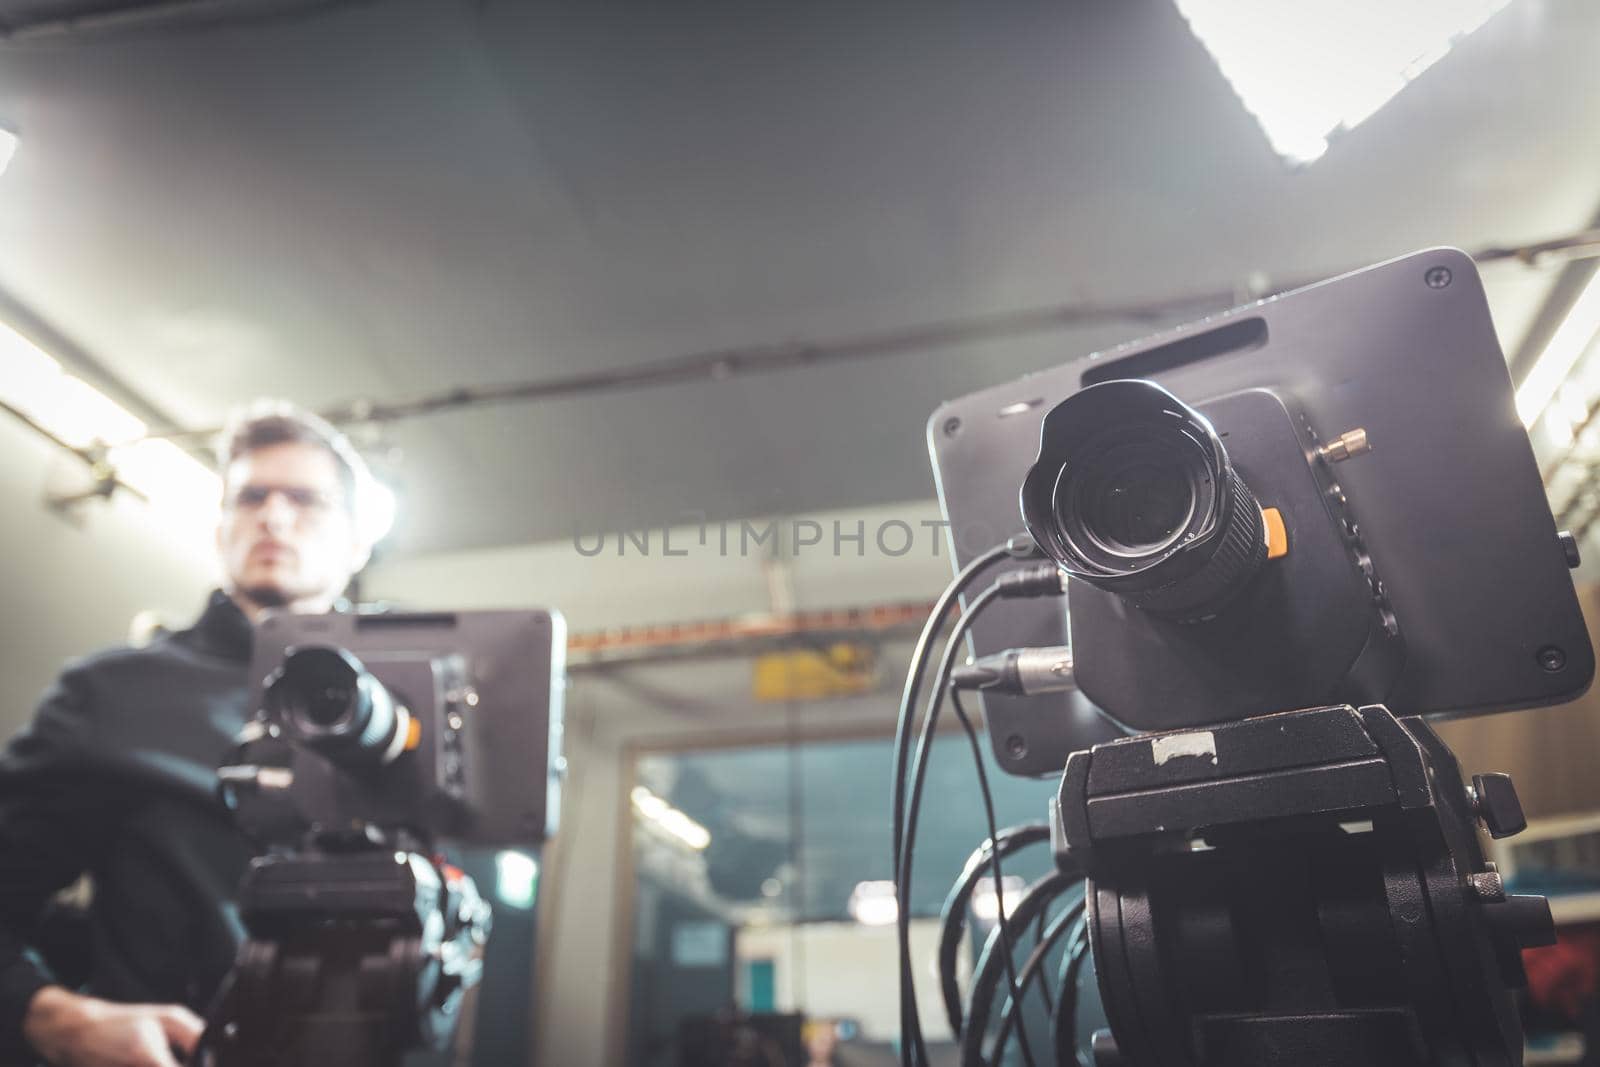 Male cameraman is operating a film camera in a television recording studio